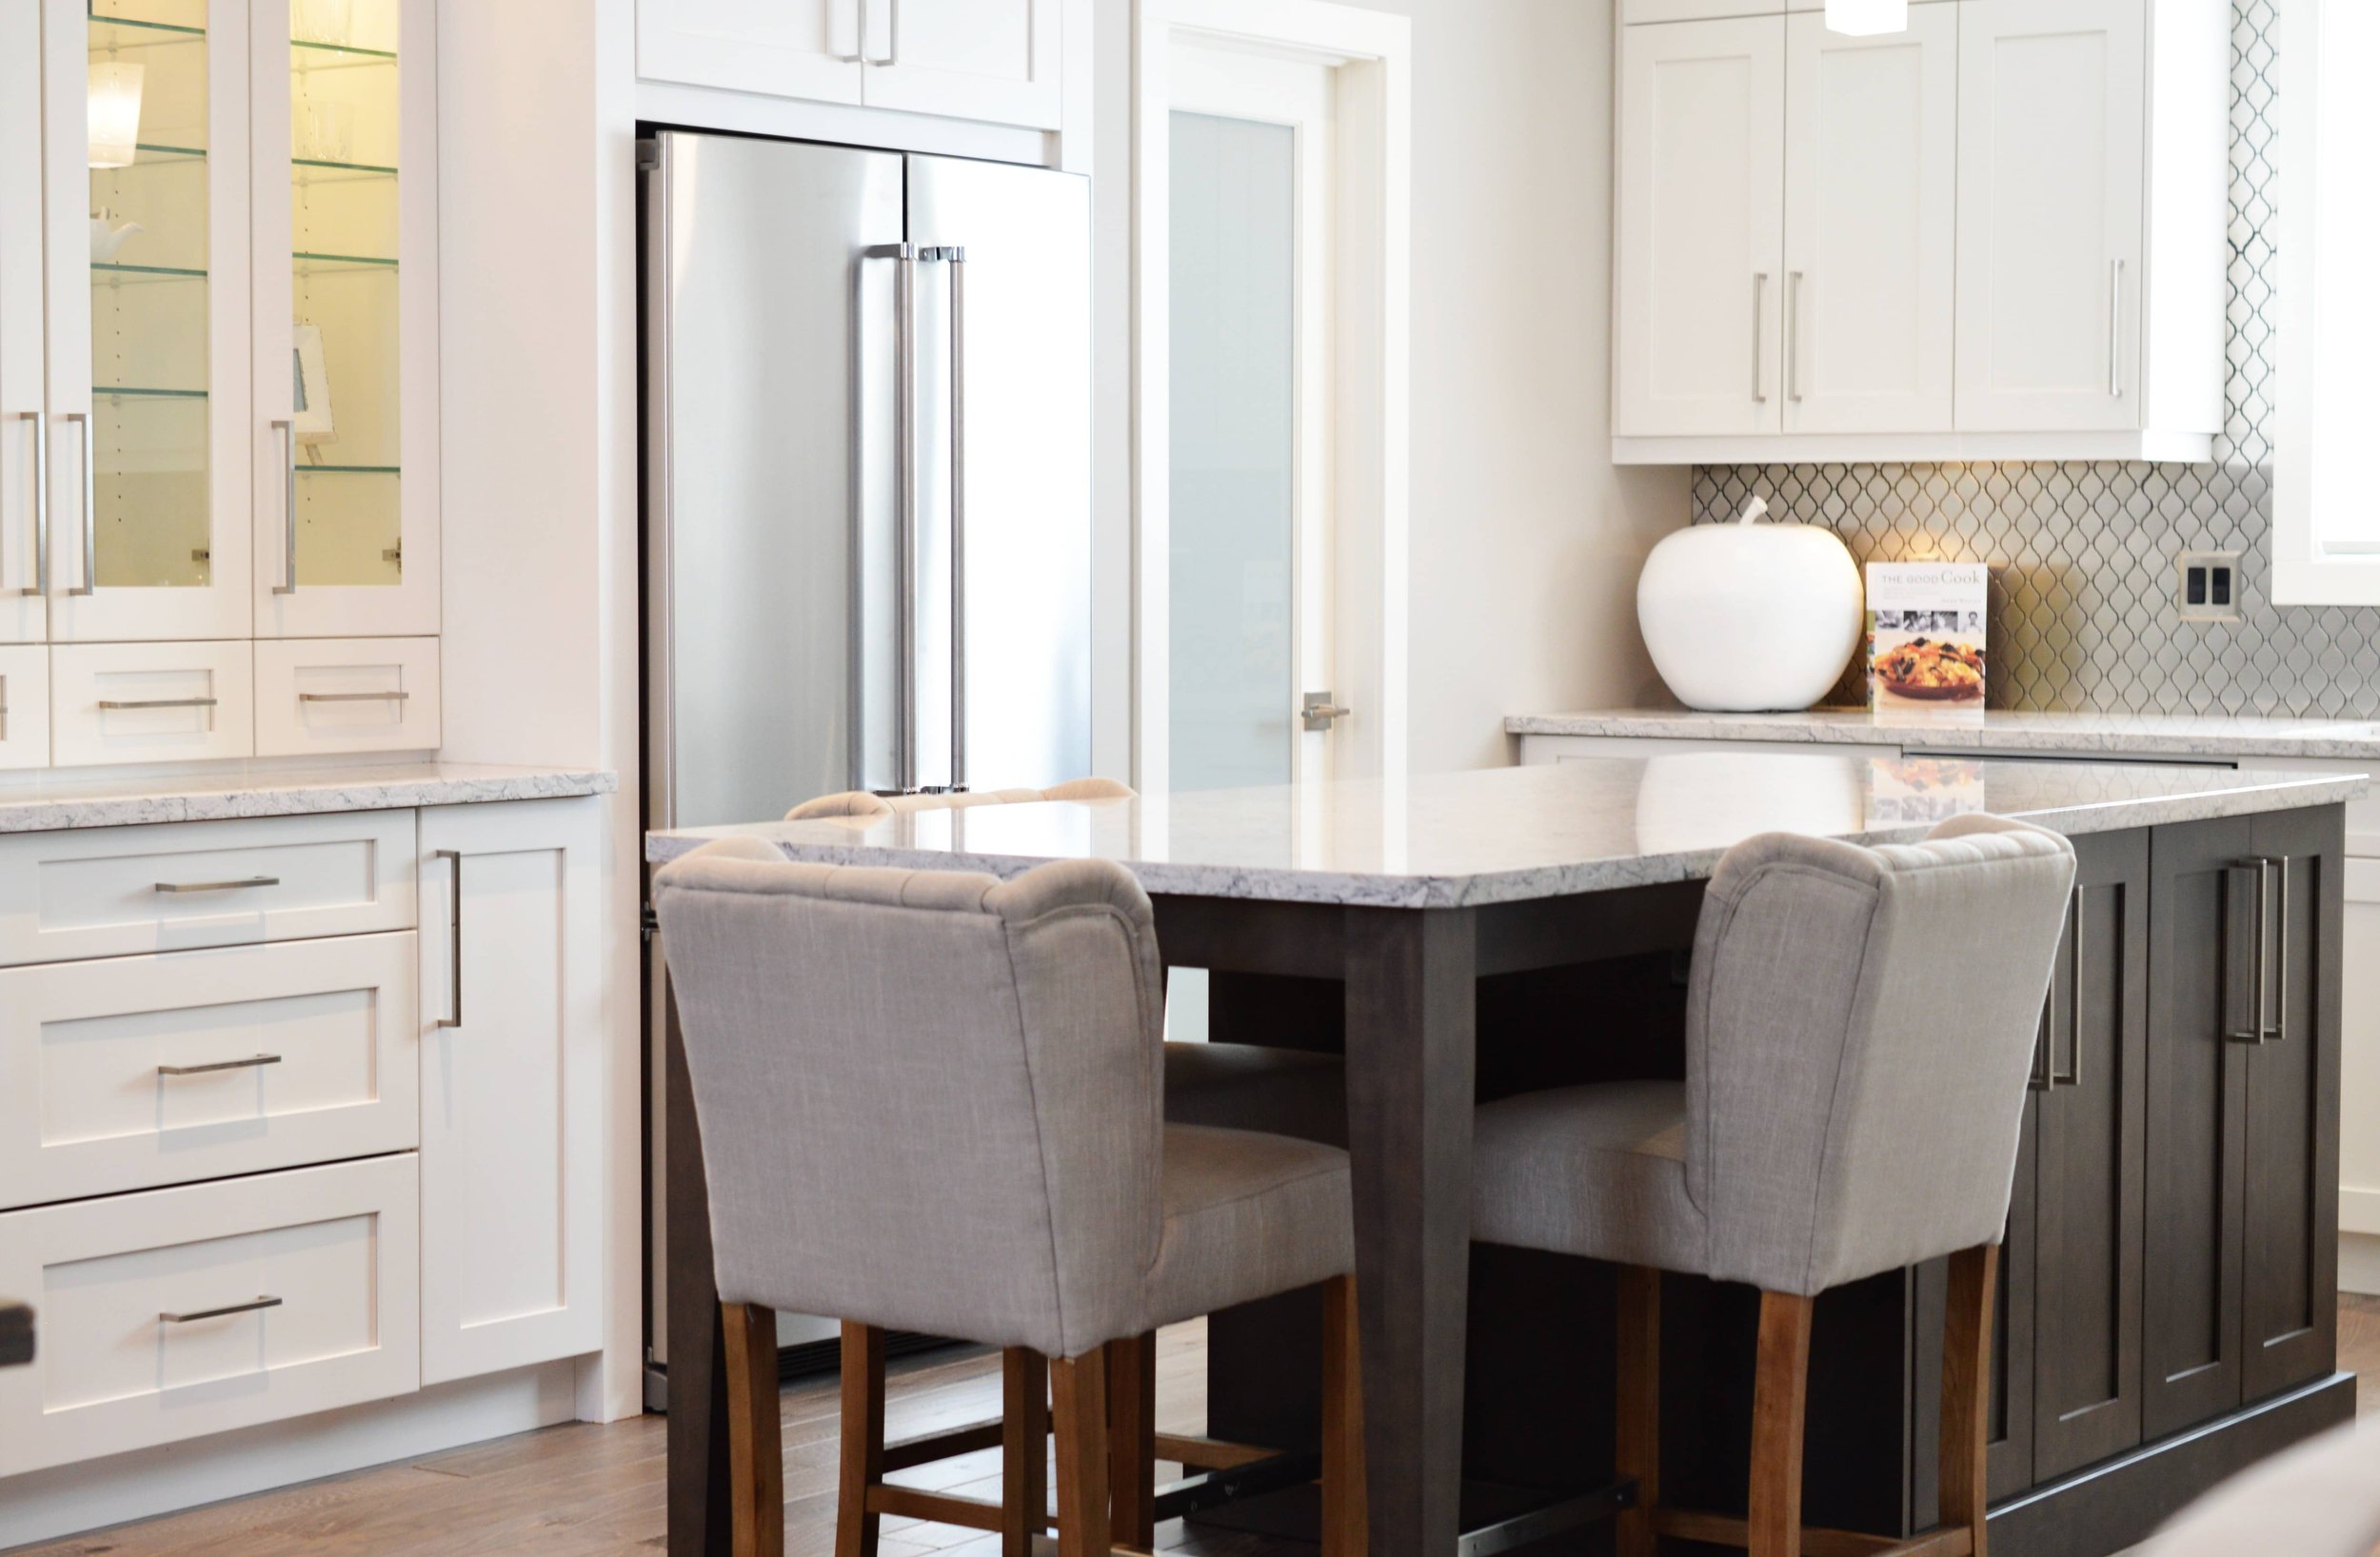 Choosing the perfect kitchen island for your home